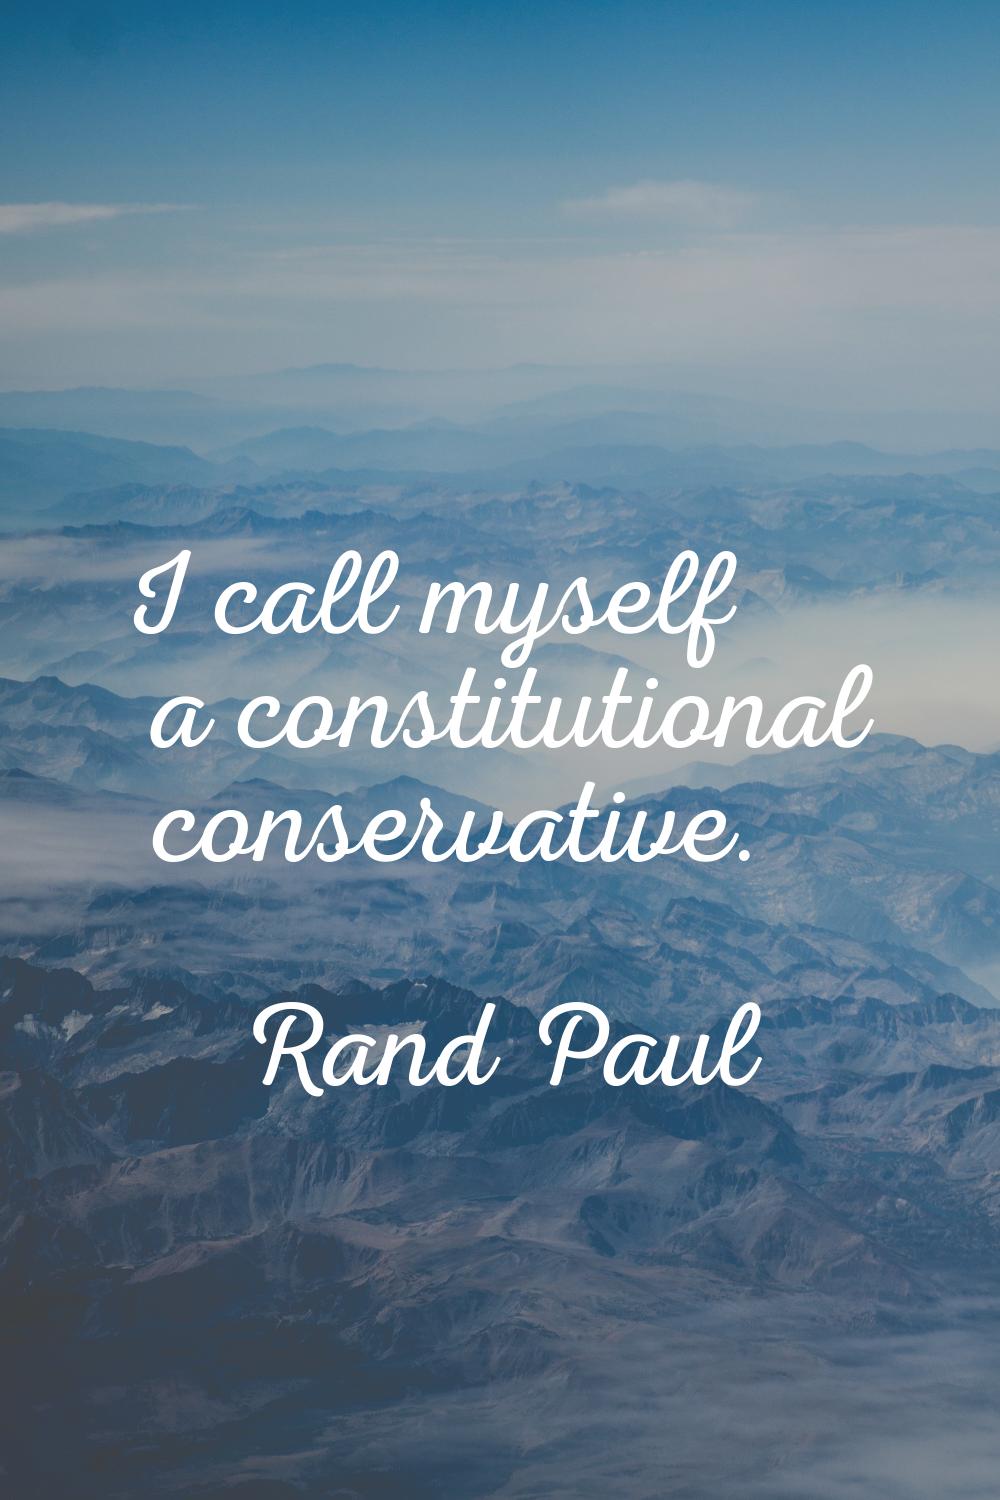 I call myself a constitutional conservative.